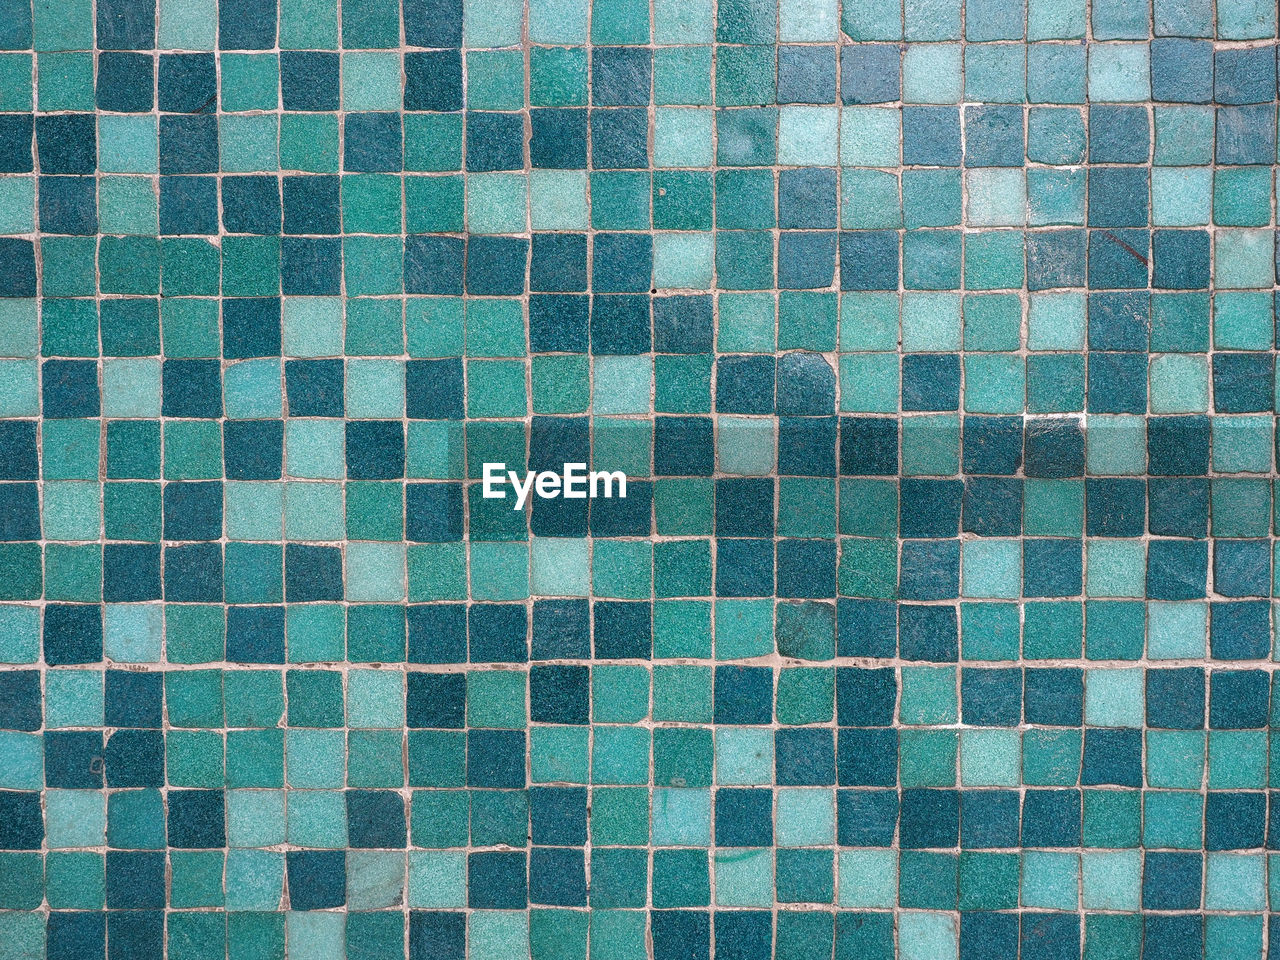 pattern, azure, backgrounds, tile, green, blue, flooring, full frame, aqua, textured, turquoise, no people, art, built structure, mosaic, circle, architecture, tiled floor, repetition, floor, wall - building feature, shape, square shape, indoors, close-up, teal, geometric shape, swimming pool, abstract, checked pattern, turquoise colored